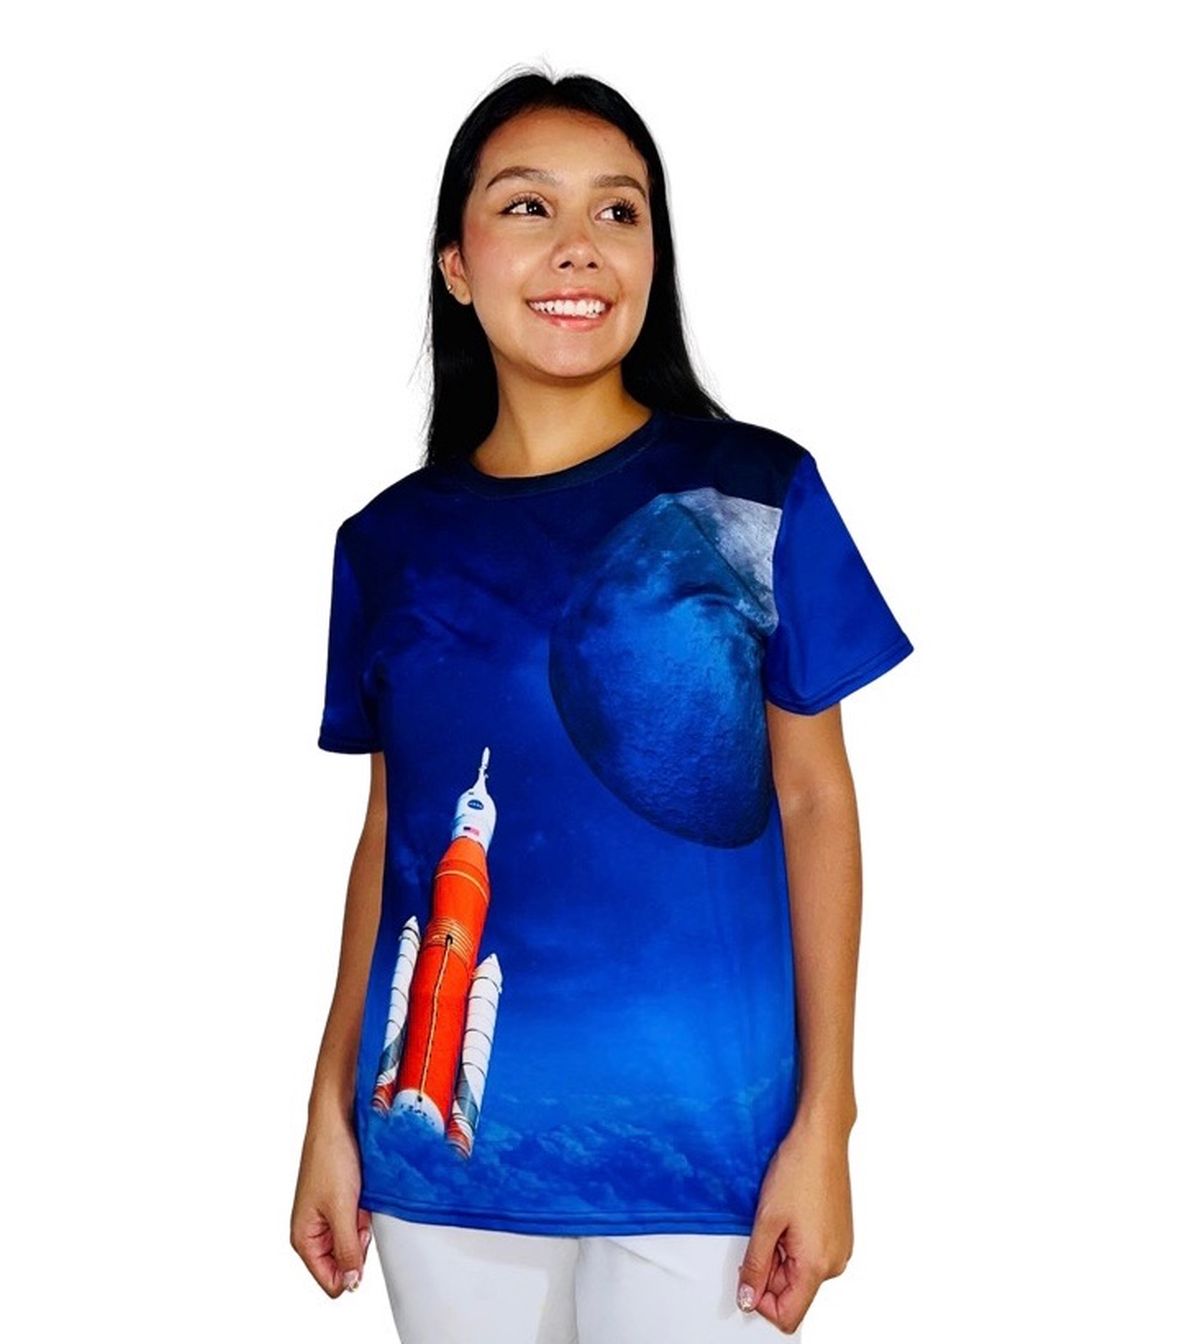 ARTEMIS SLS Rocket to the moon (version 2) youth 8-20 - The Space Store